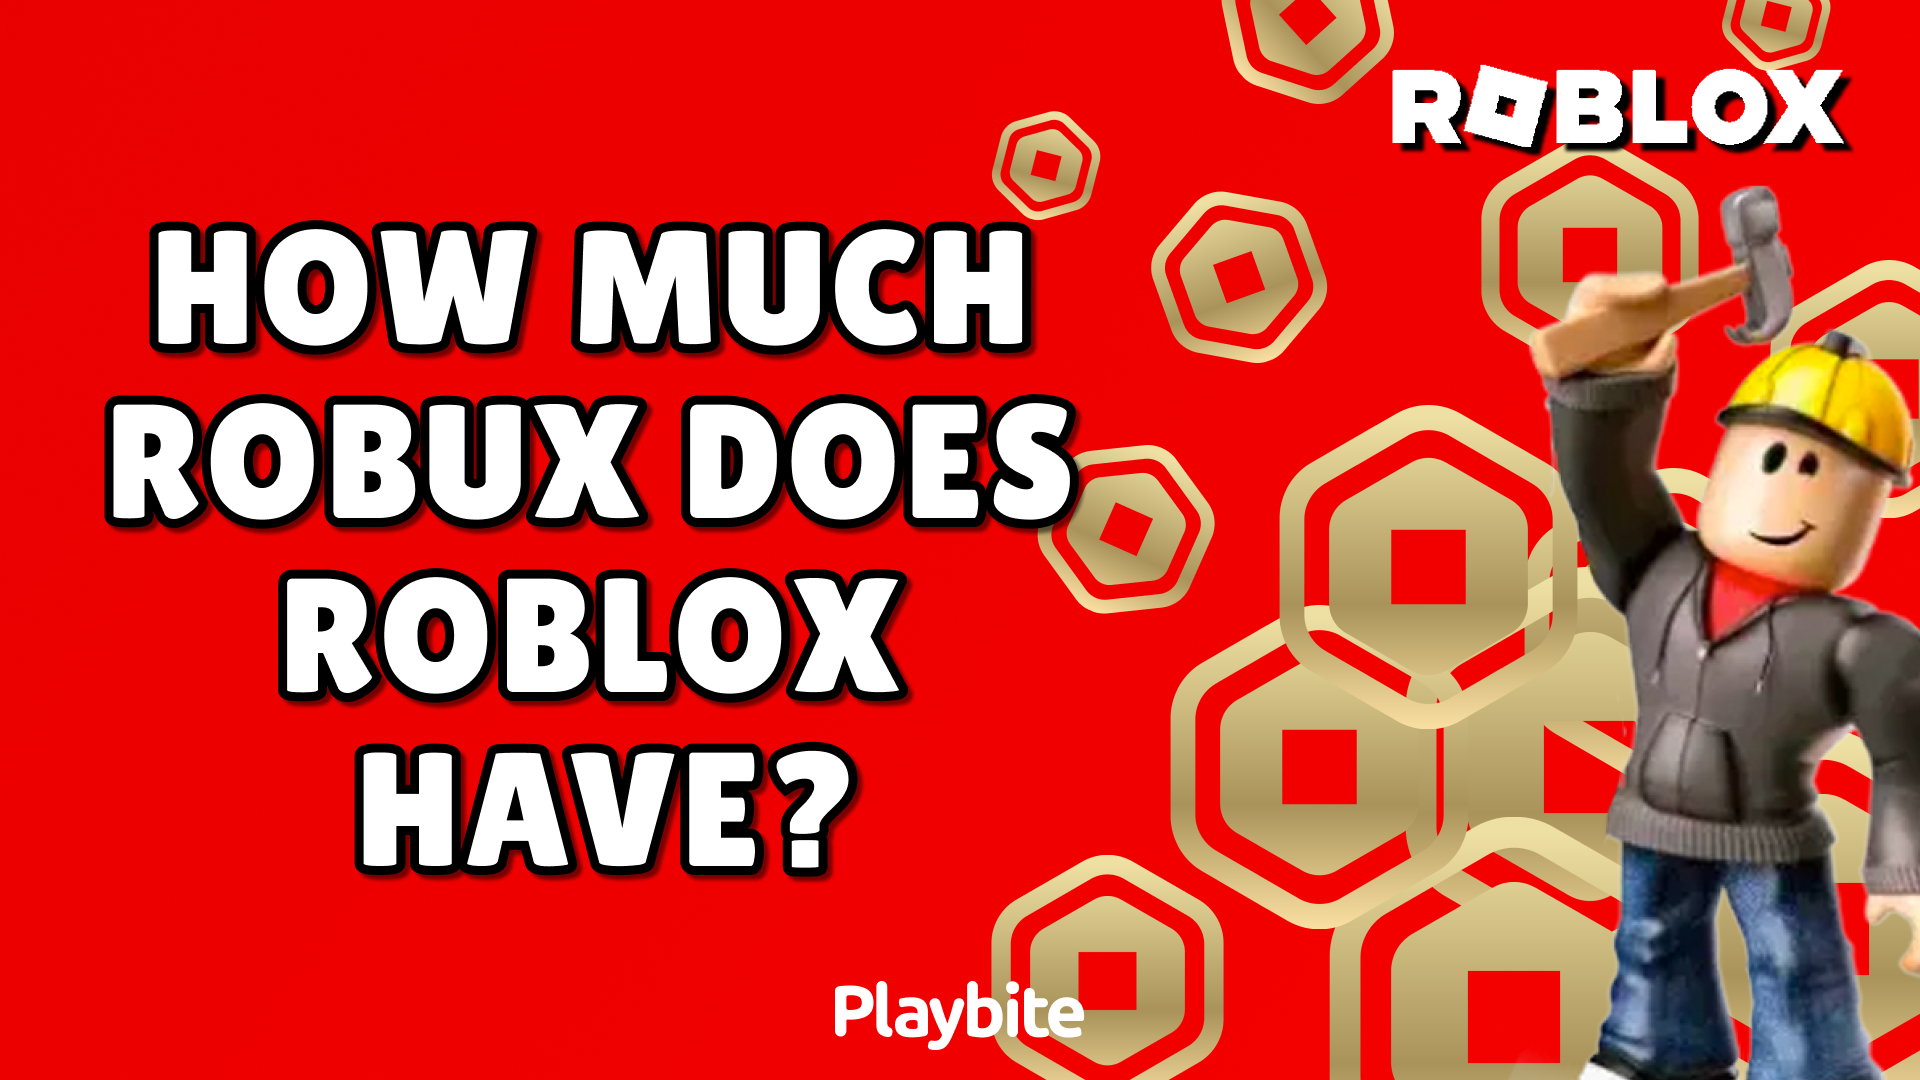 How Much Robux Does Roblox Have?